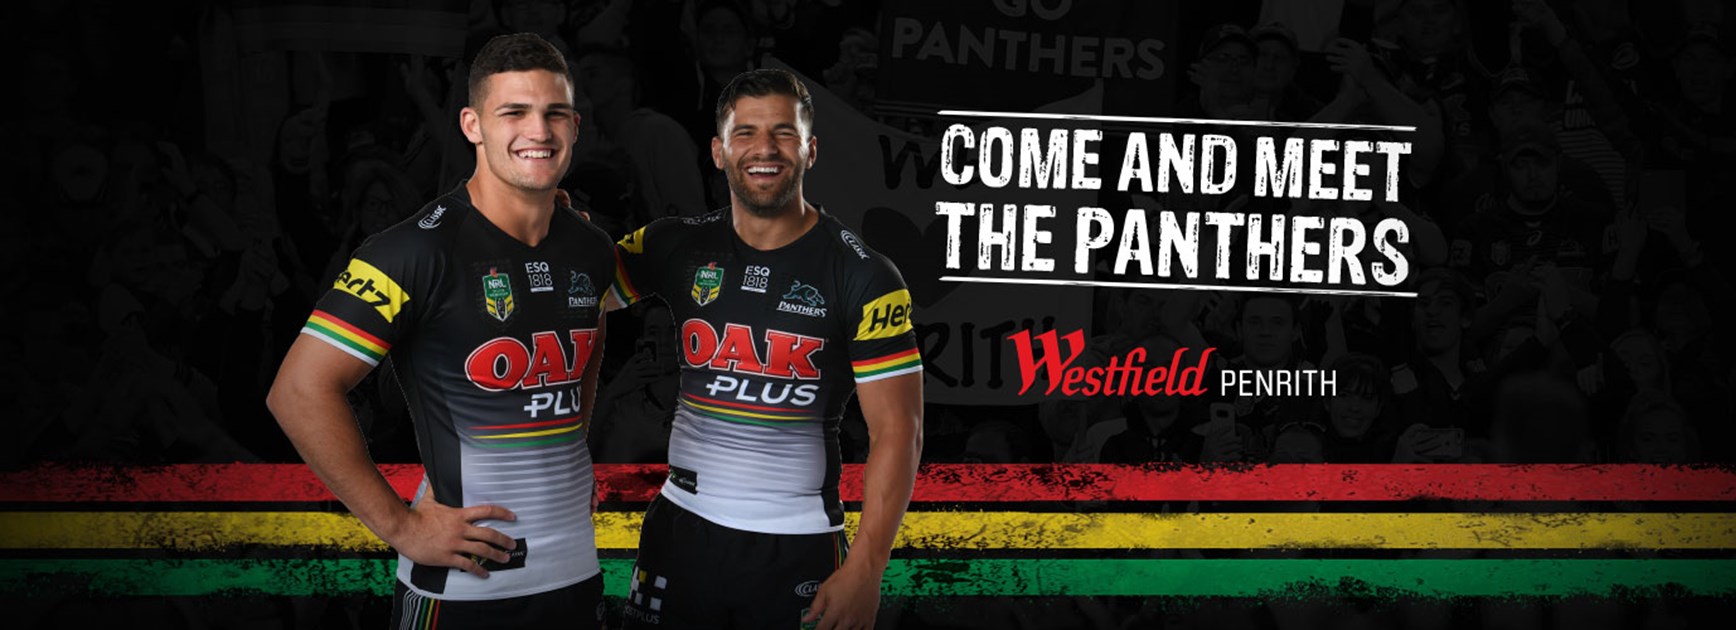 Team Appearance at Westfield Penrith